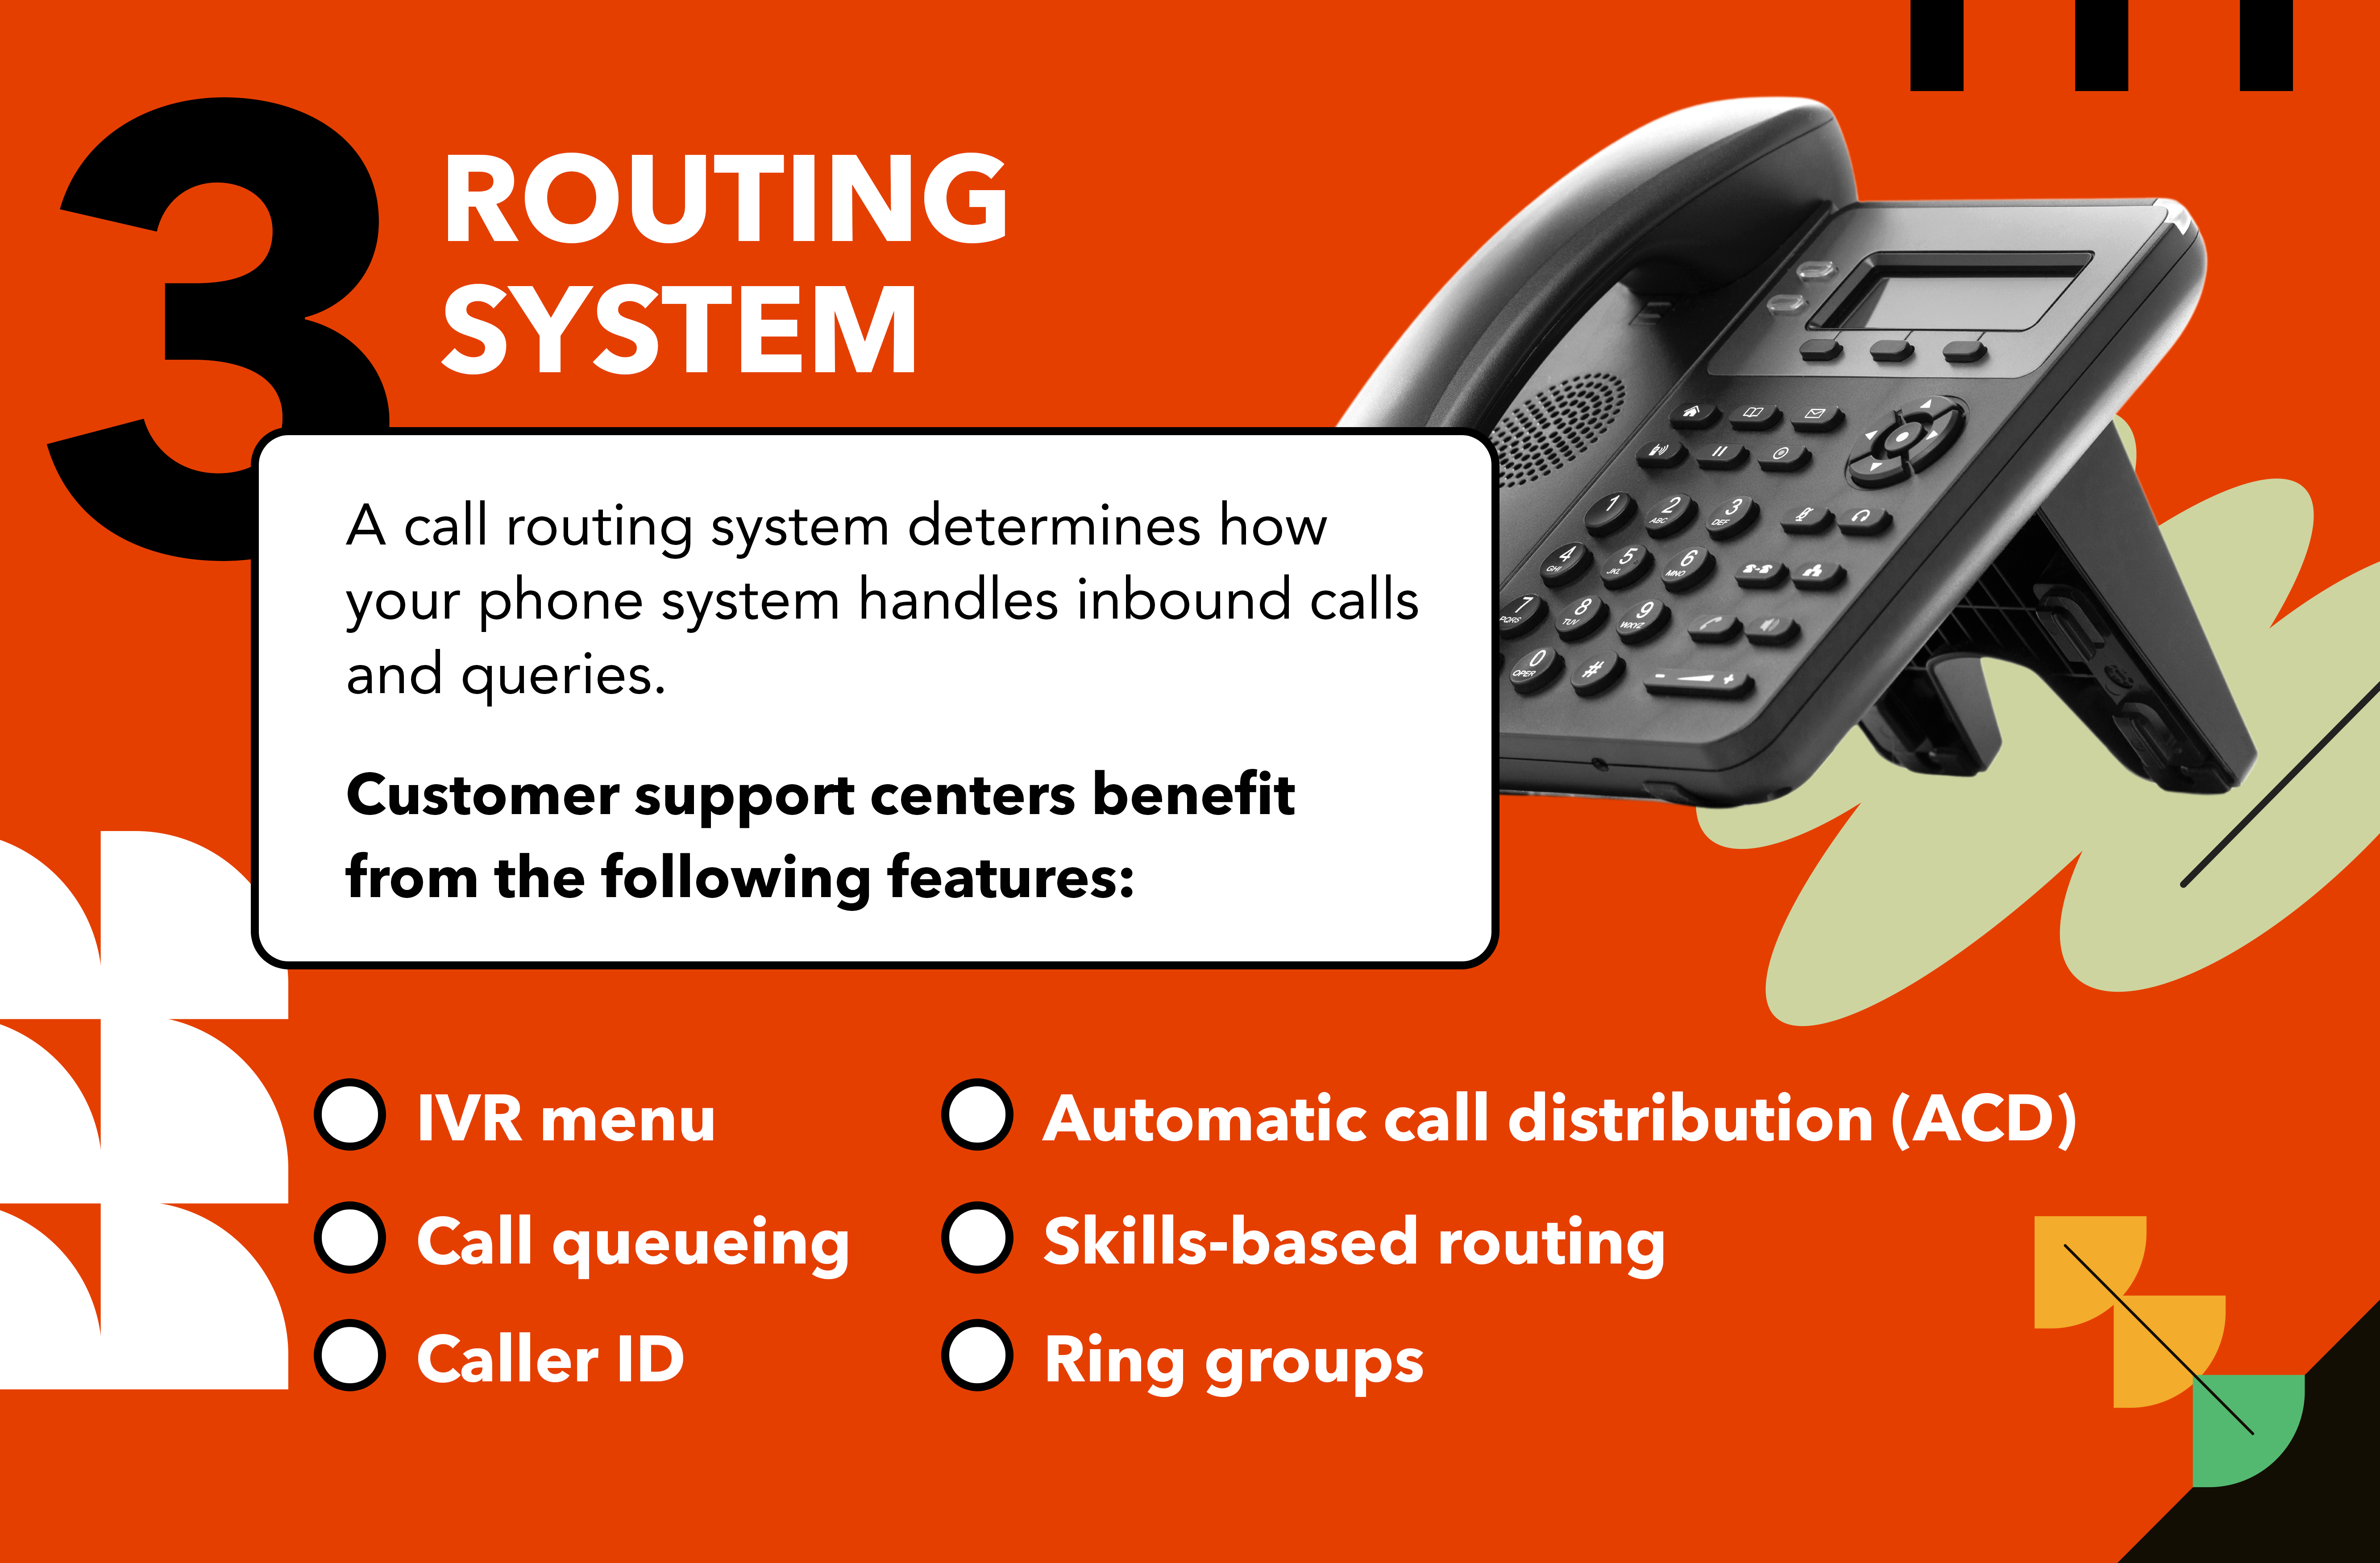 Contact center software requirements checklist - routing system